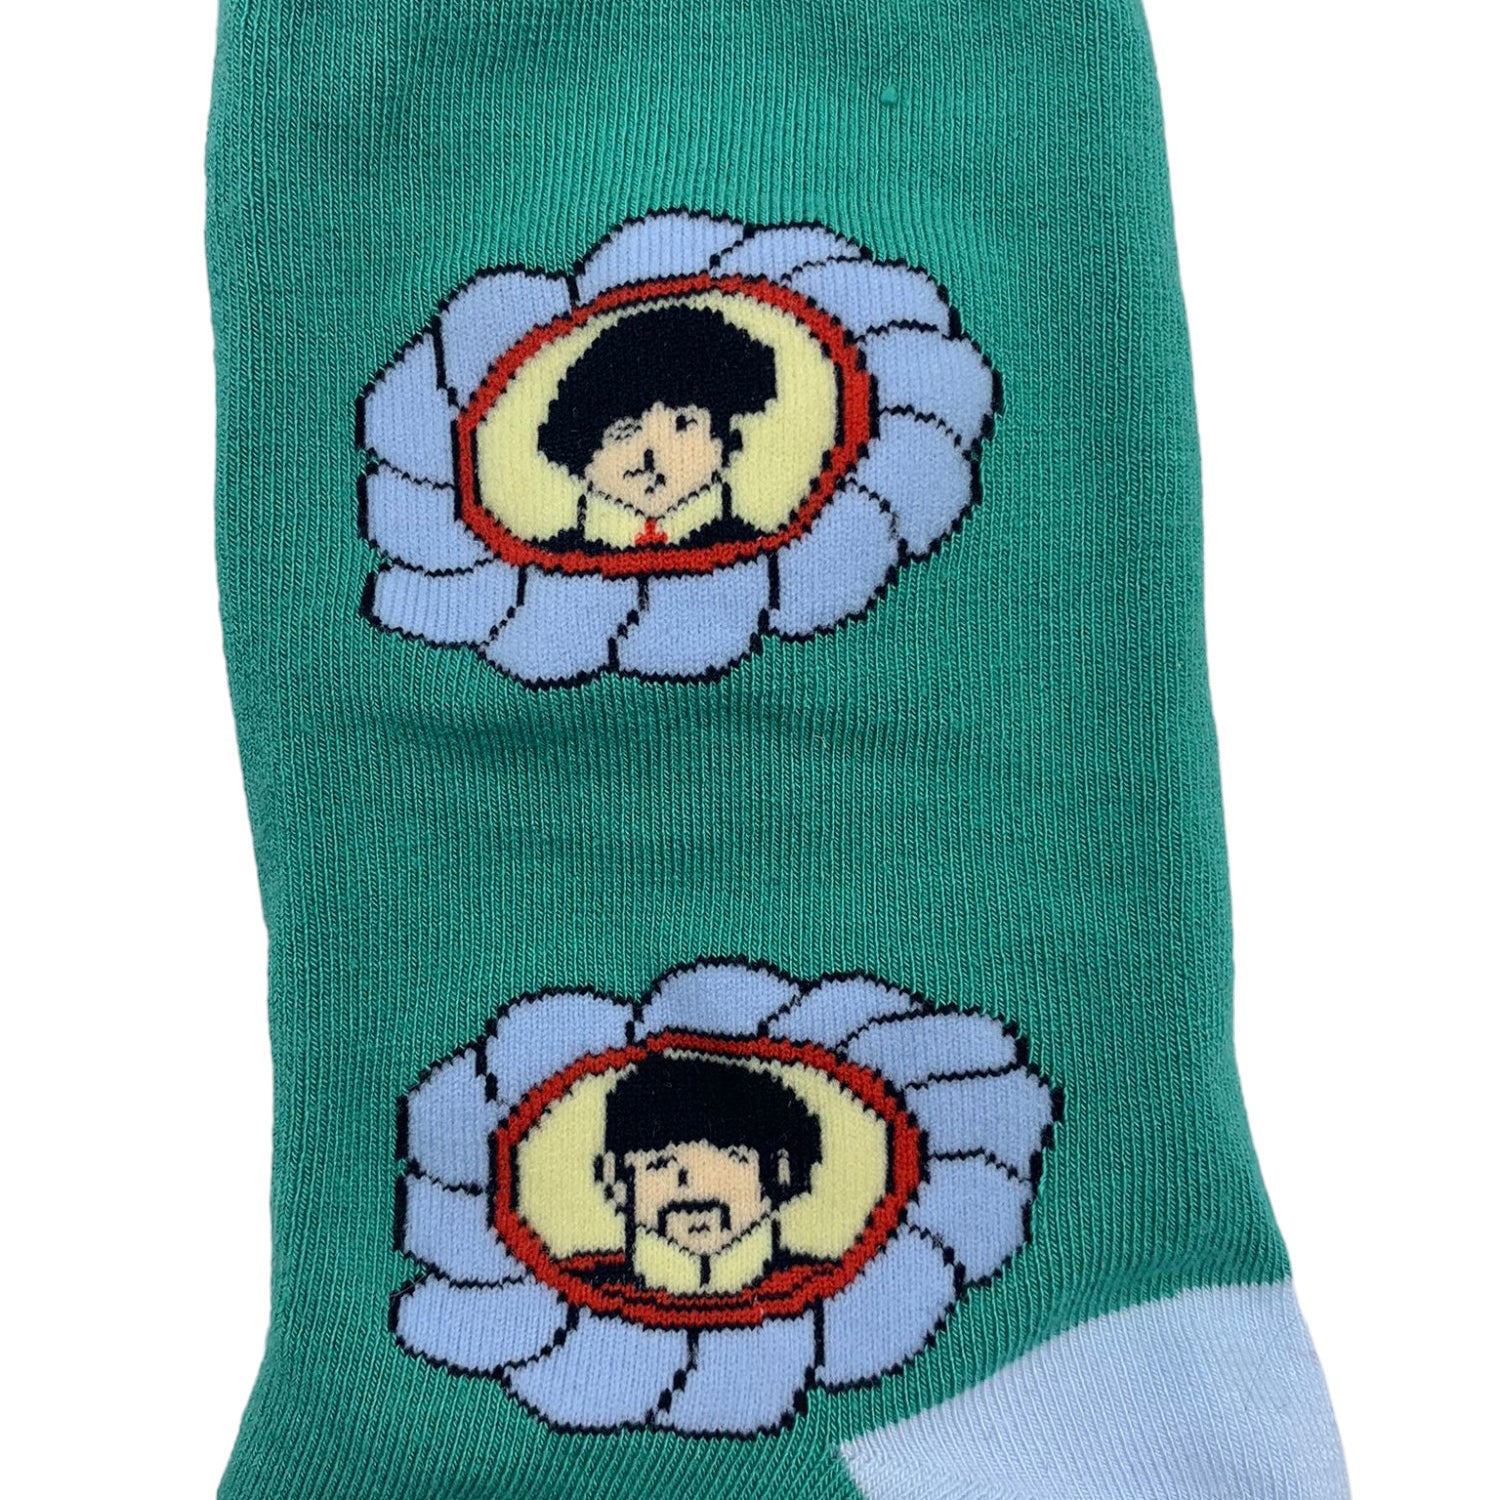 The Beatles Psychedelic Socks